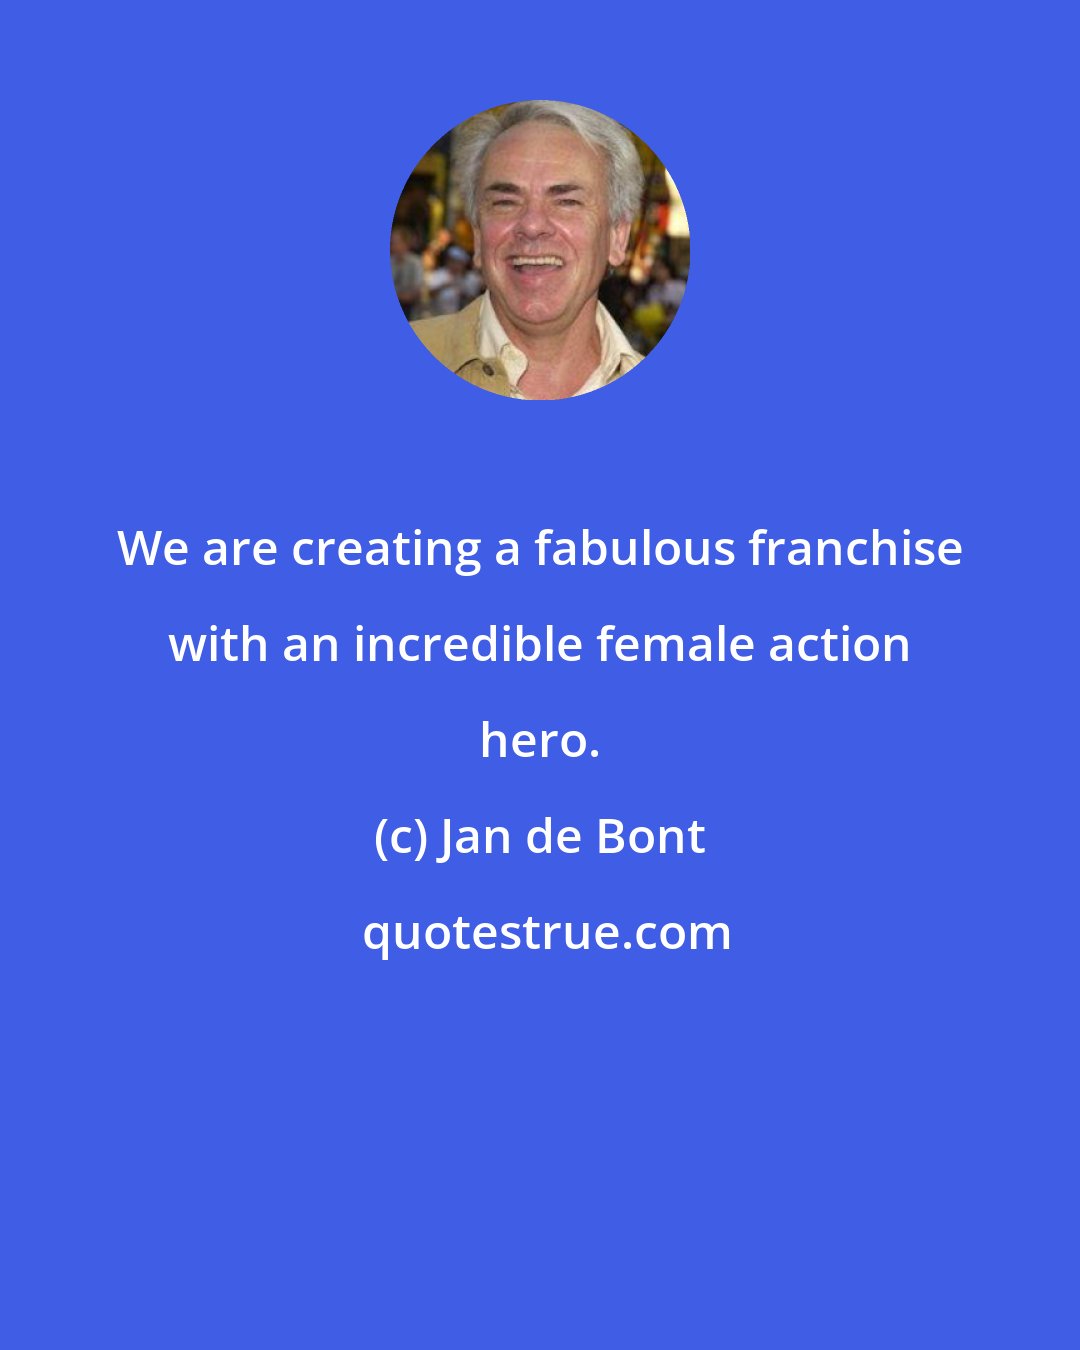 Jan de Bont: We are creating a fabulous franchise with an incredible female action hero.